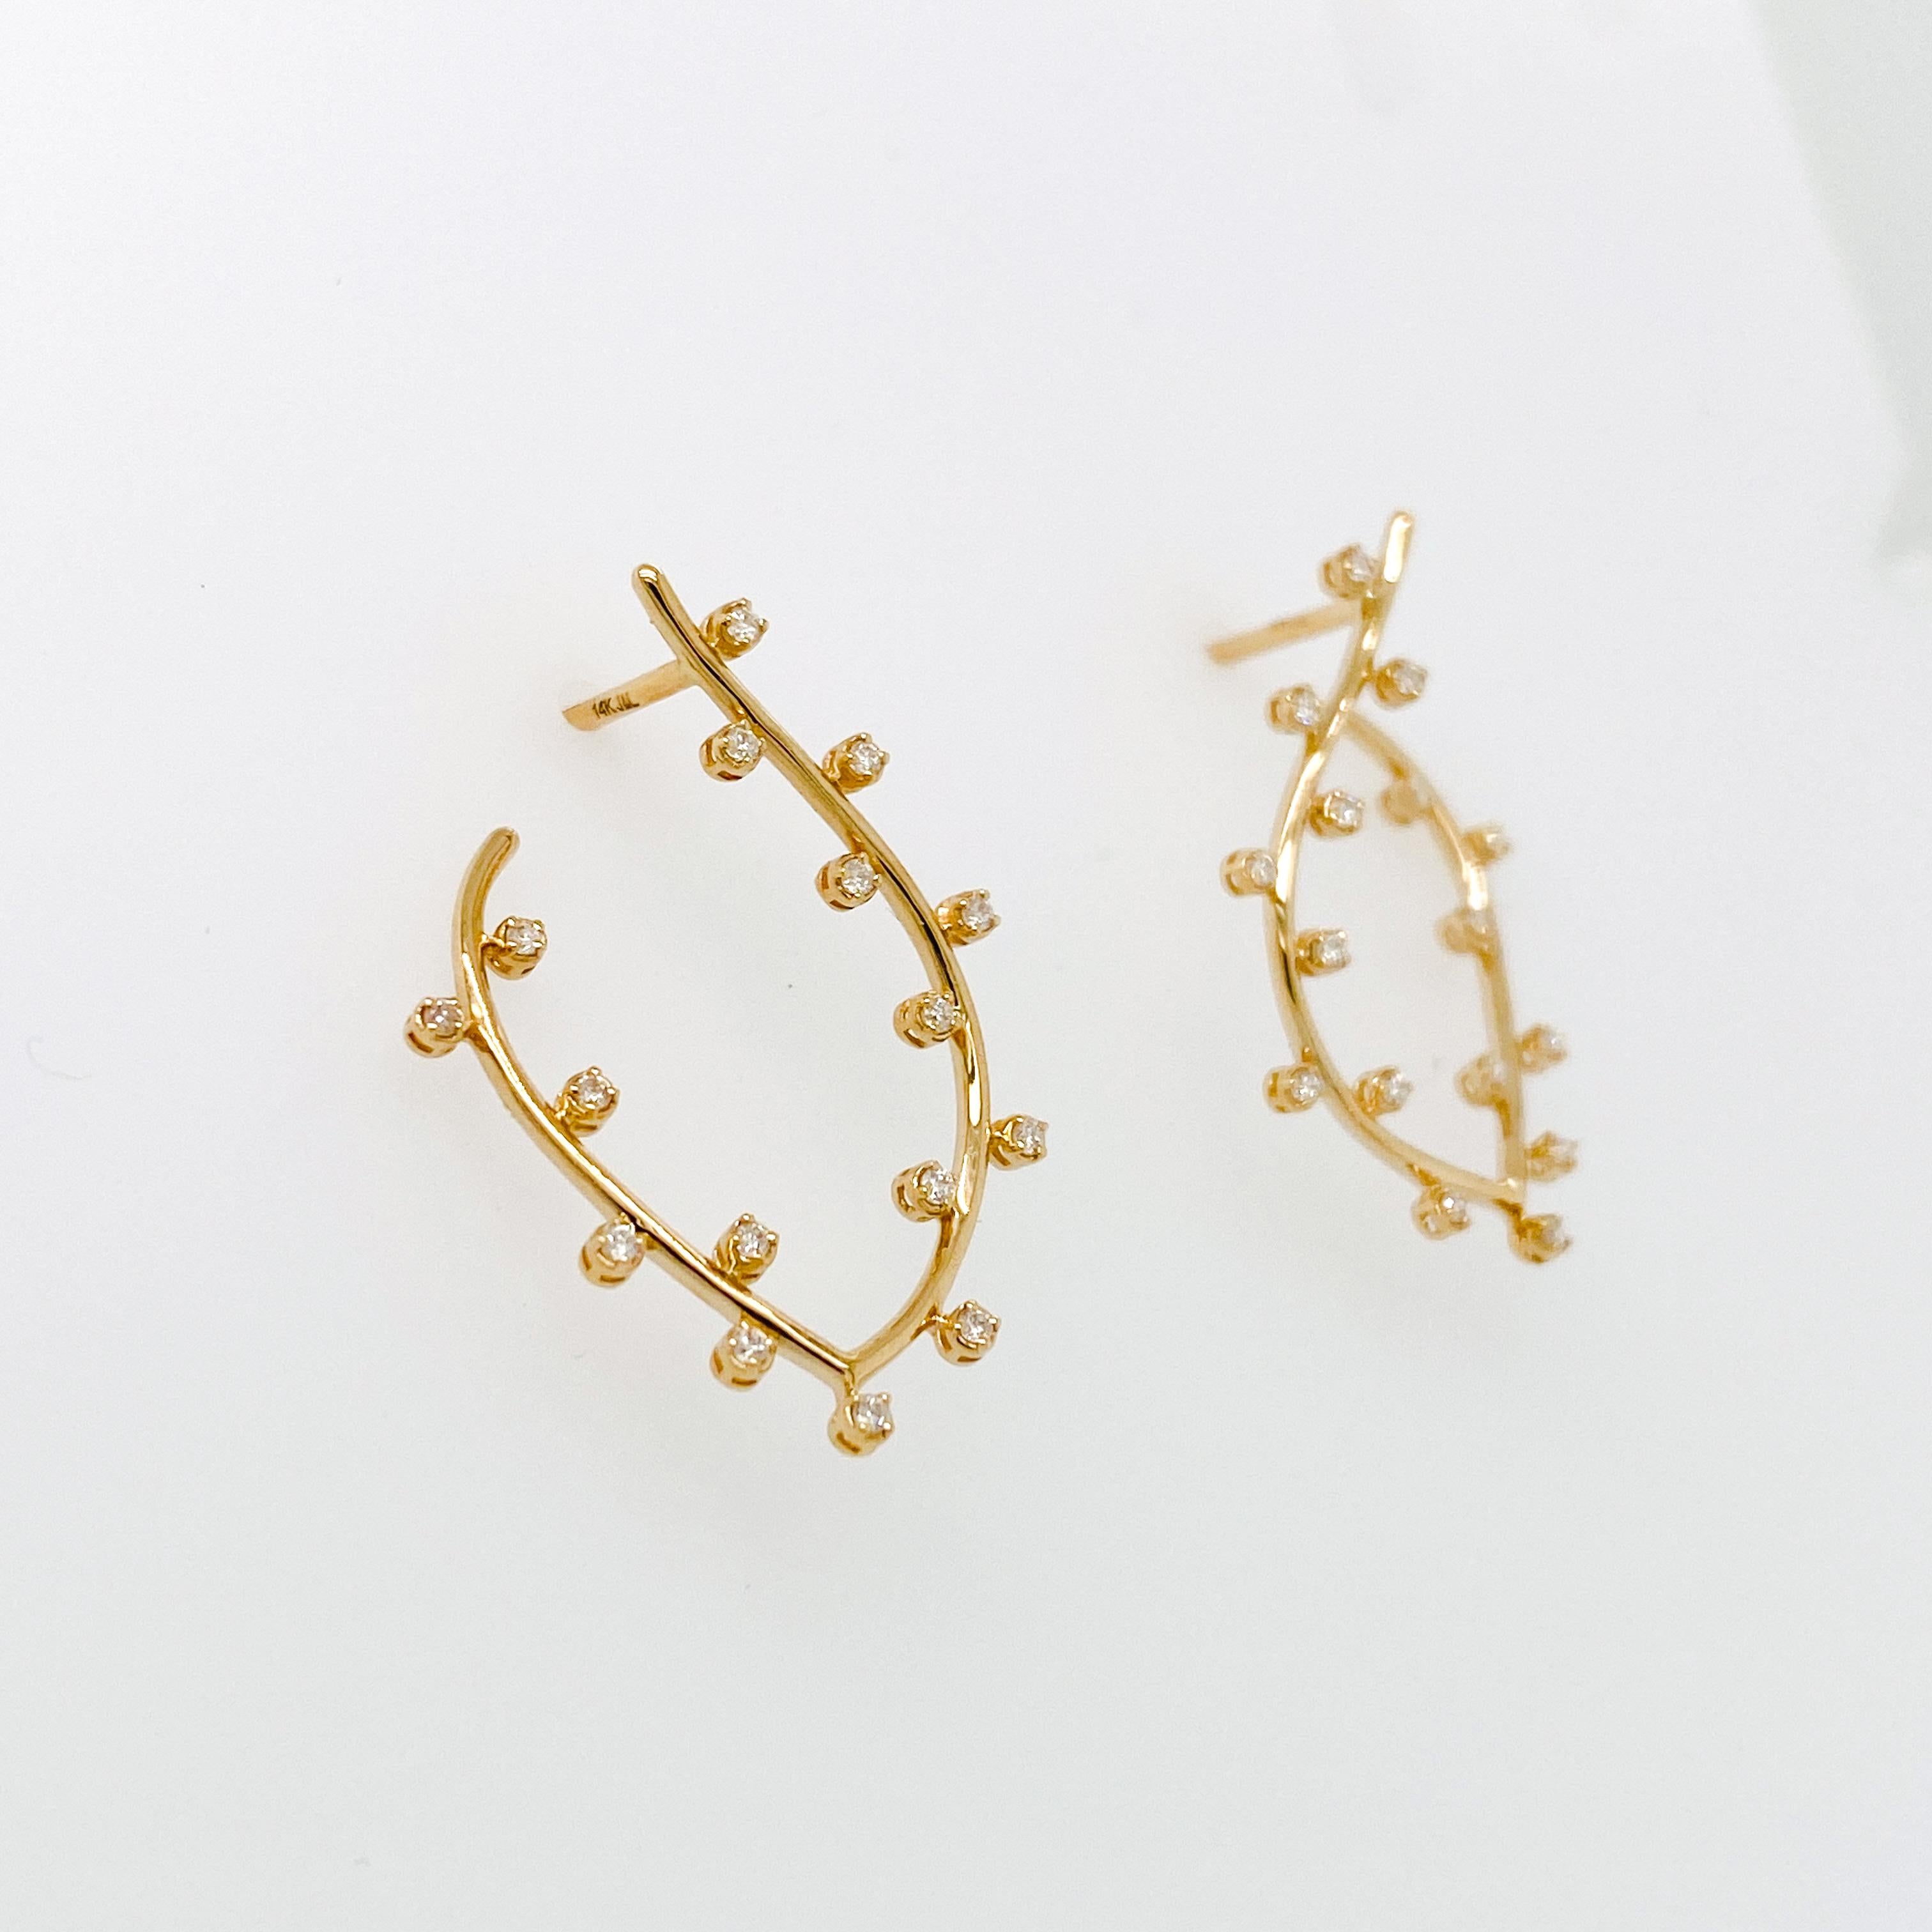 A creative arrangement of 14K gold leaf vine shape with 32 diamonds. The diamonds are amazing quality and made to perfection. The earrings start in the front of your ear and end at the back of the ear. Each diamond is set in a secure 4 prong